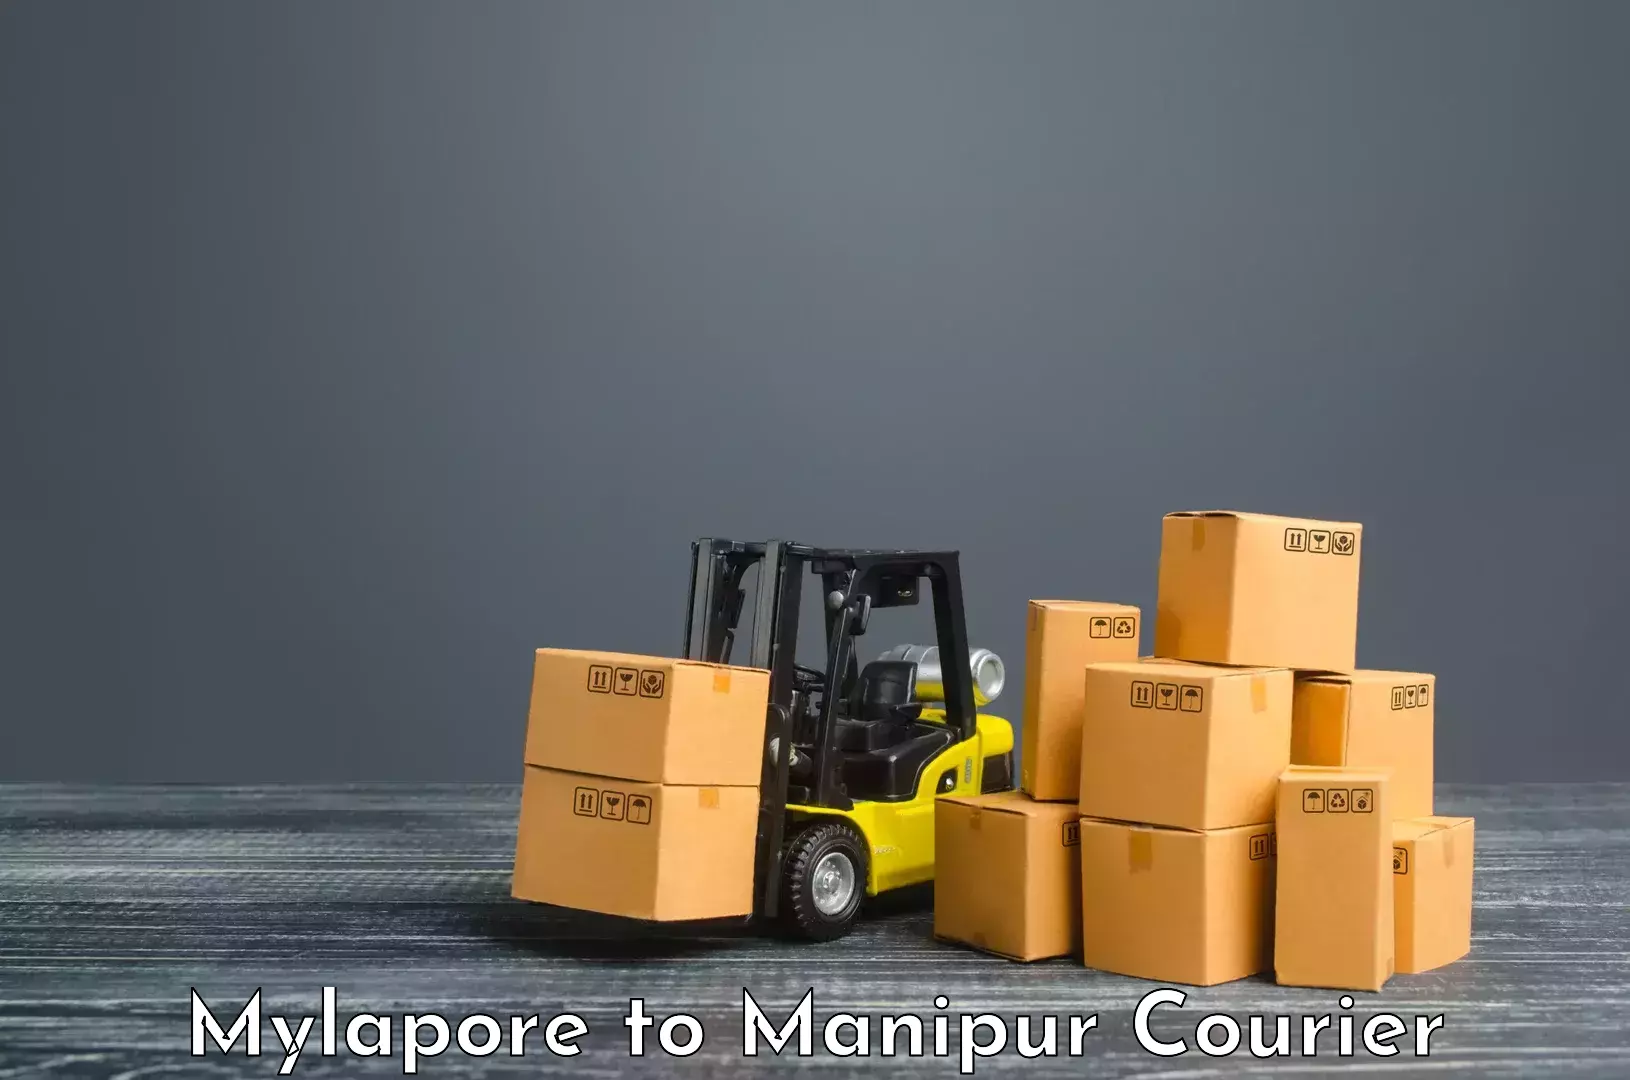 Global courier networks Mylapore to Manipur